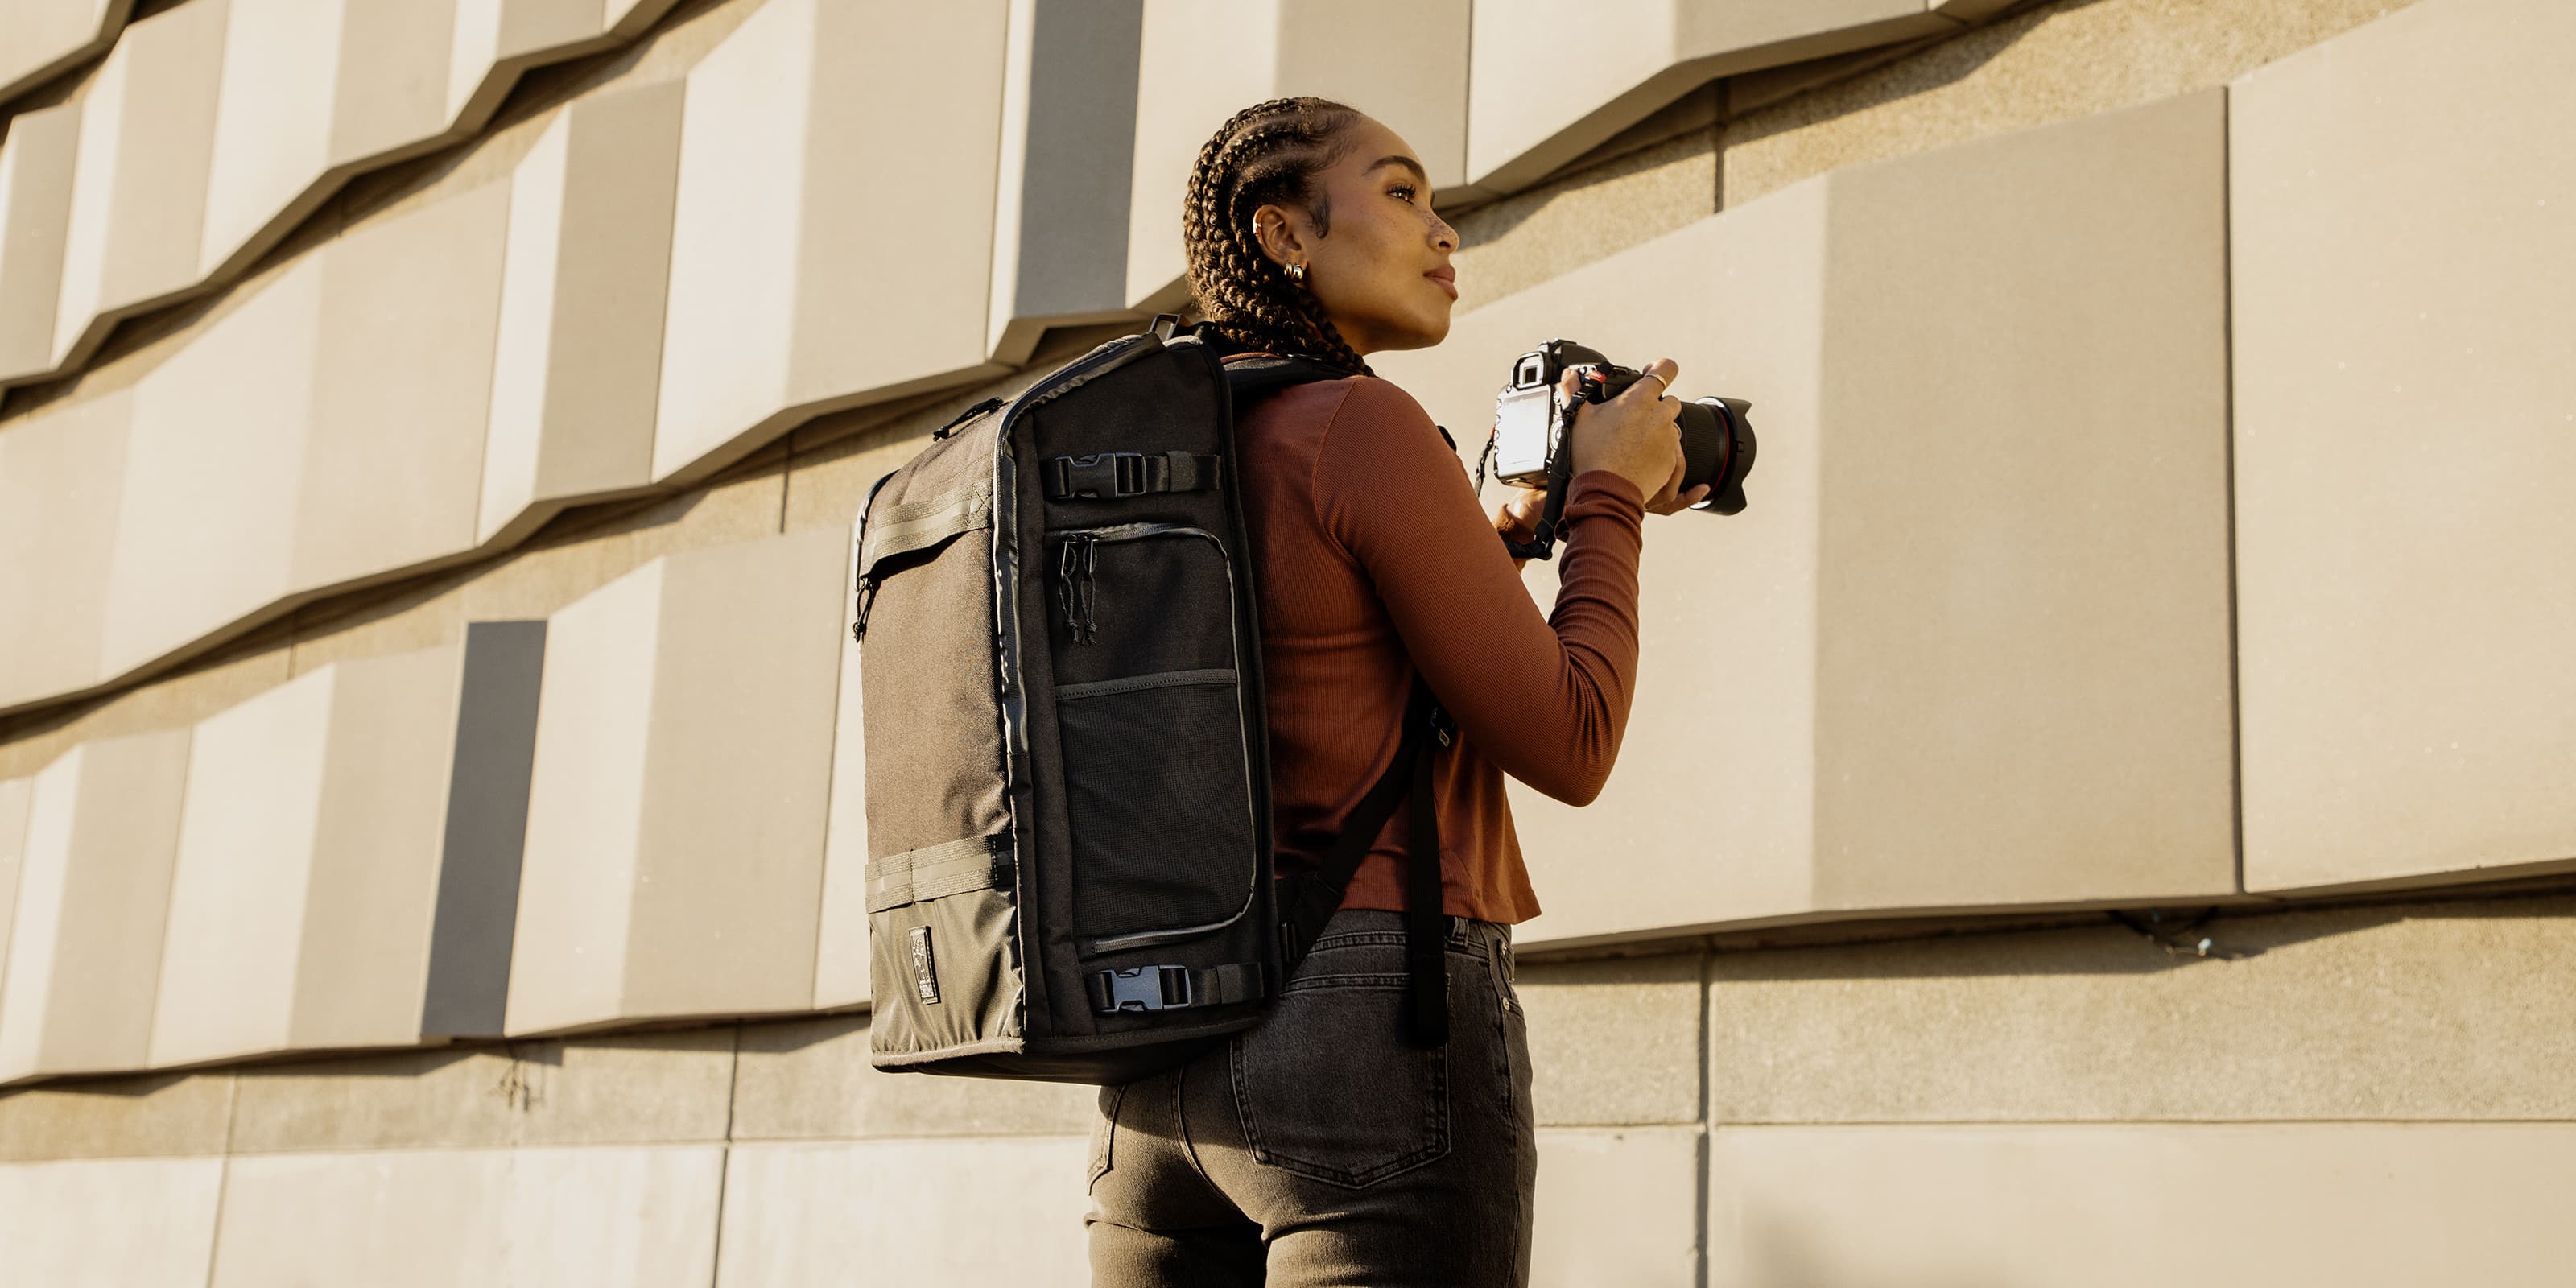 Niko Camera Backpack worn by a photographer larger desktop image size